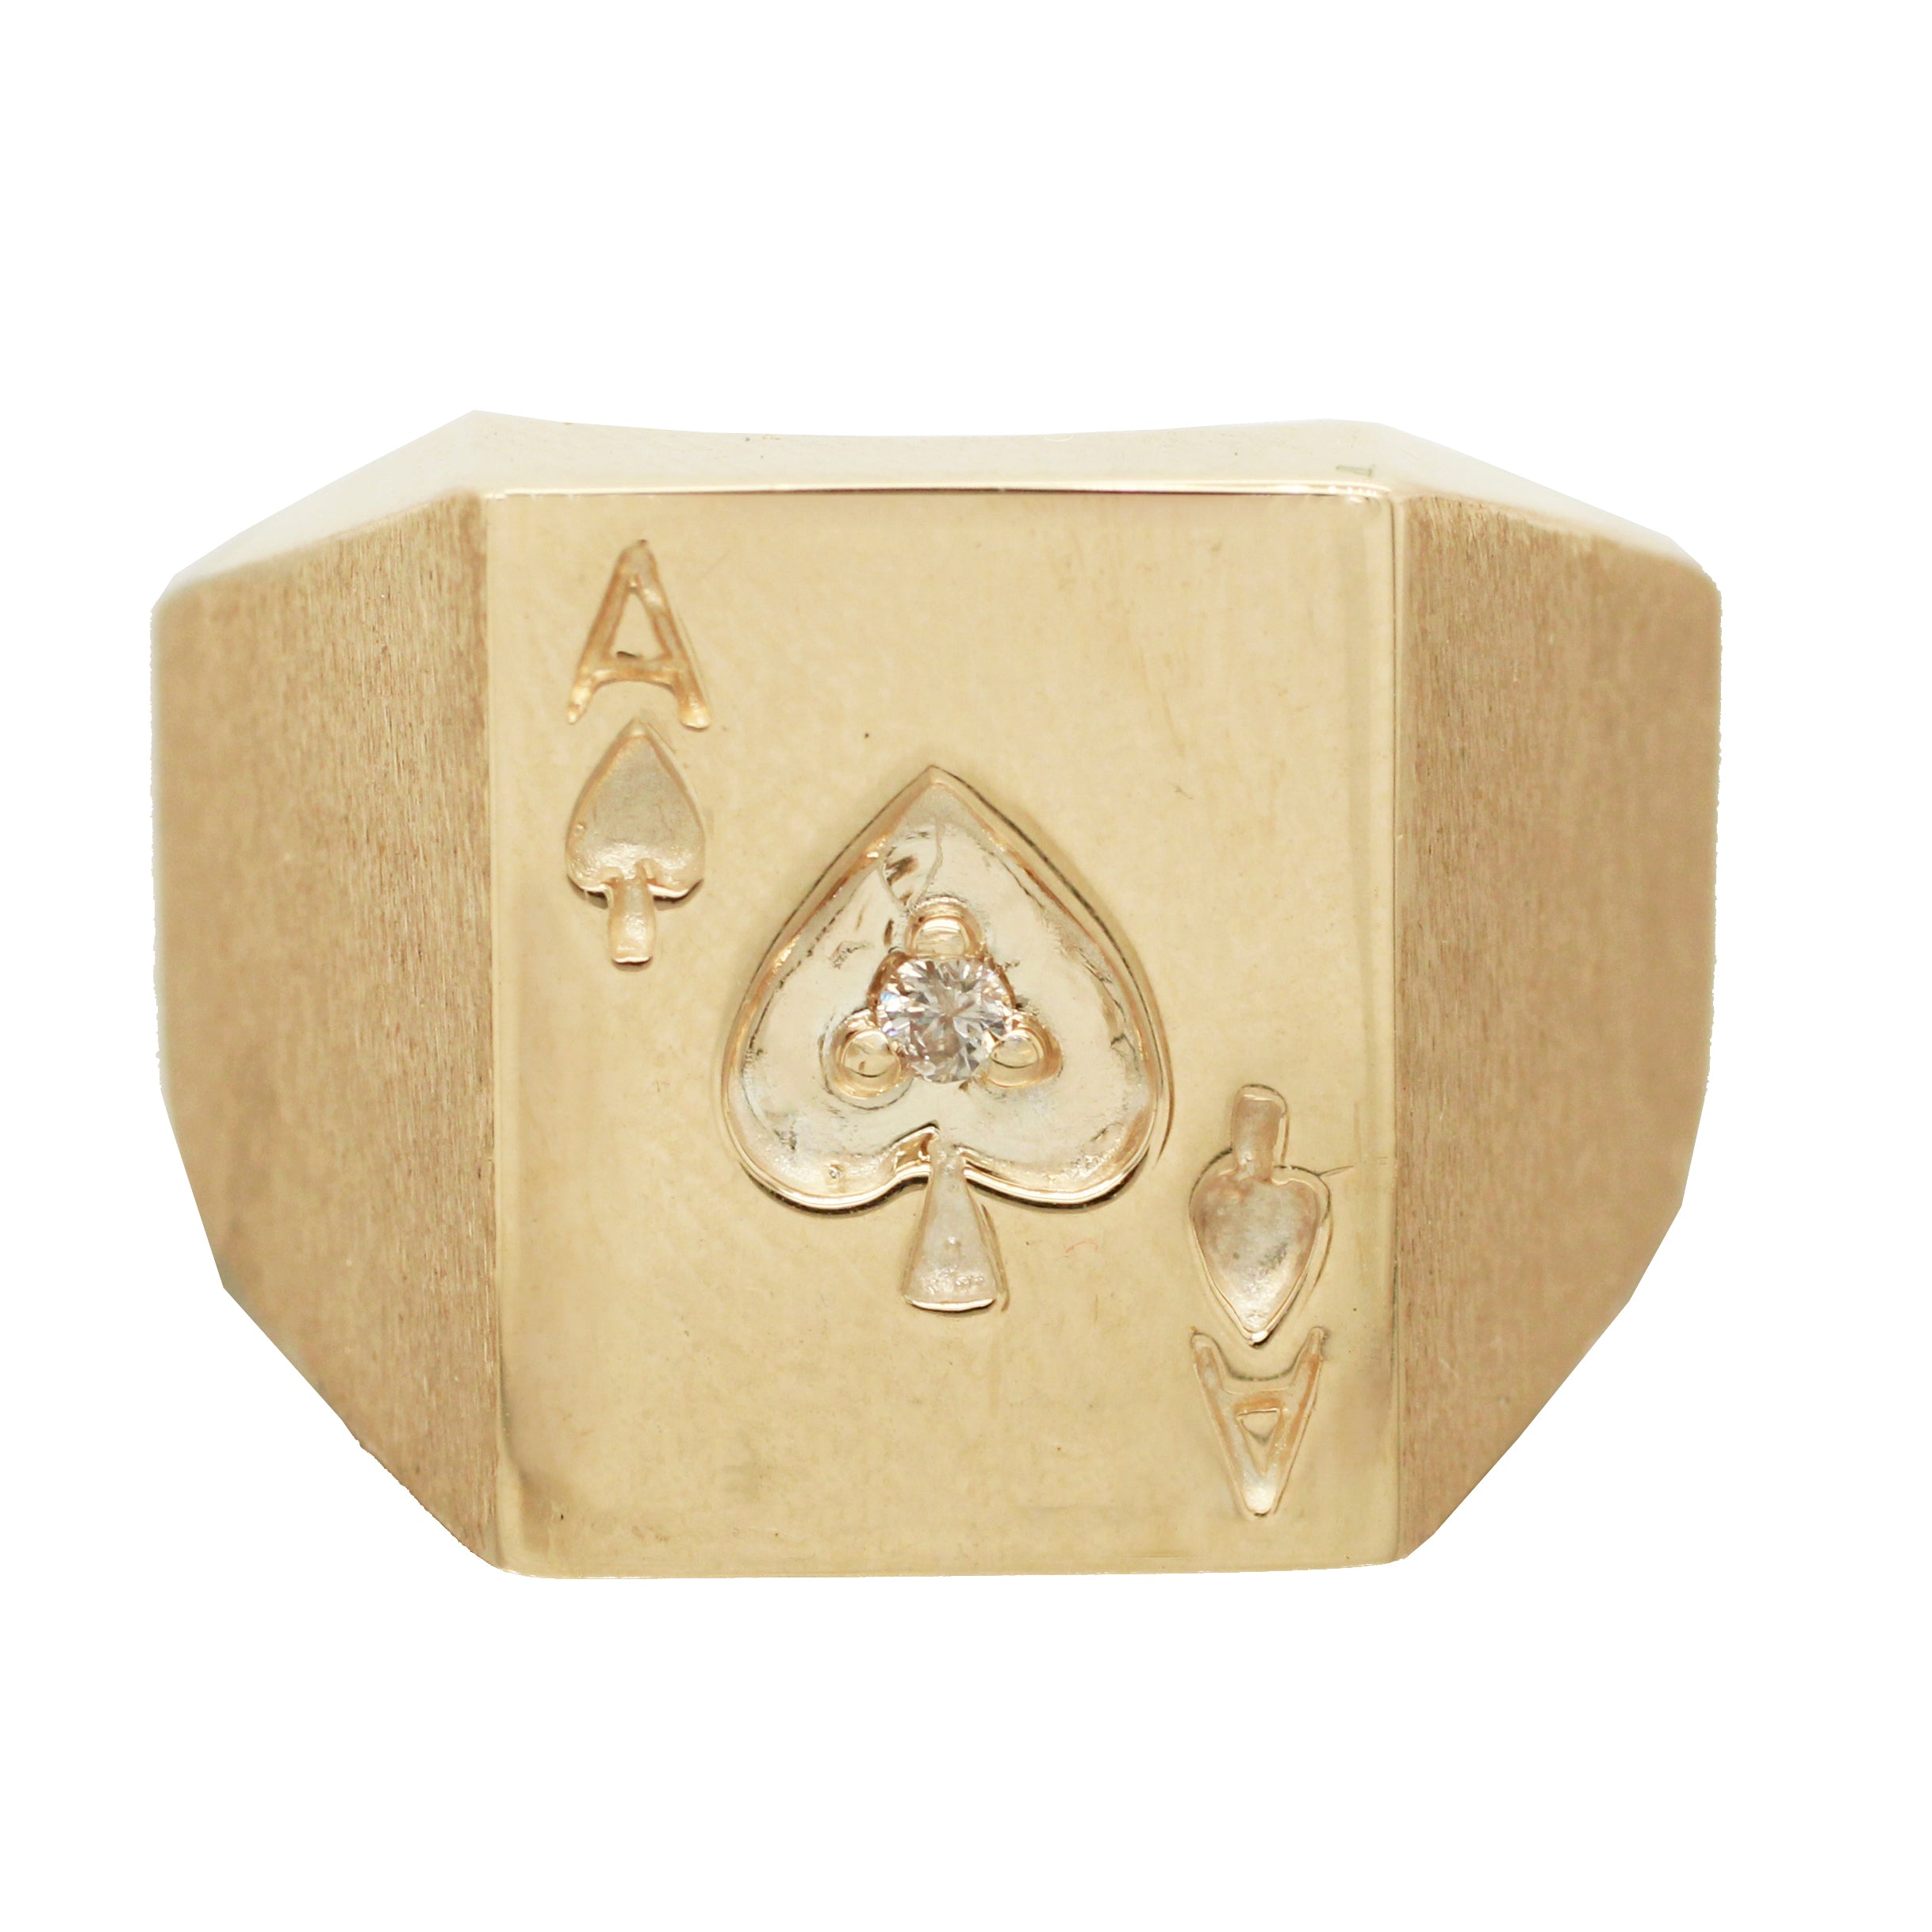 Vintage 0.02ct Diamond Ace of Spades Signet Ring - 14k Yellow Gold - Size 9